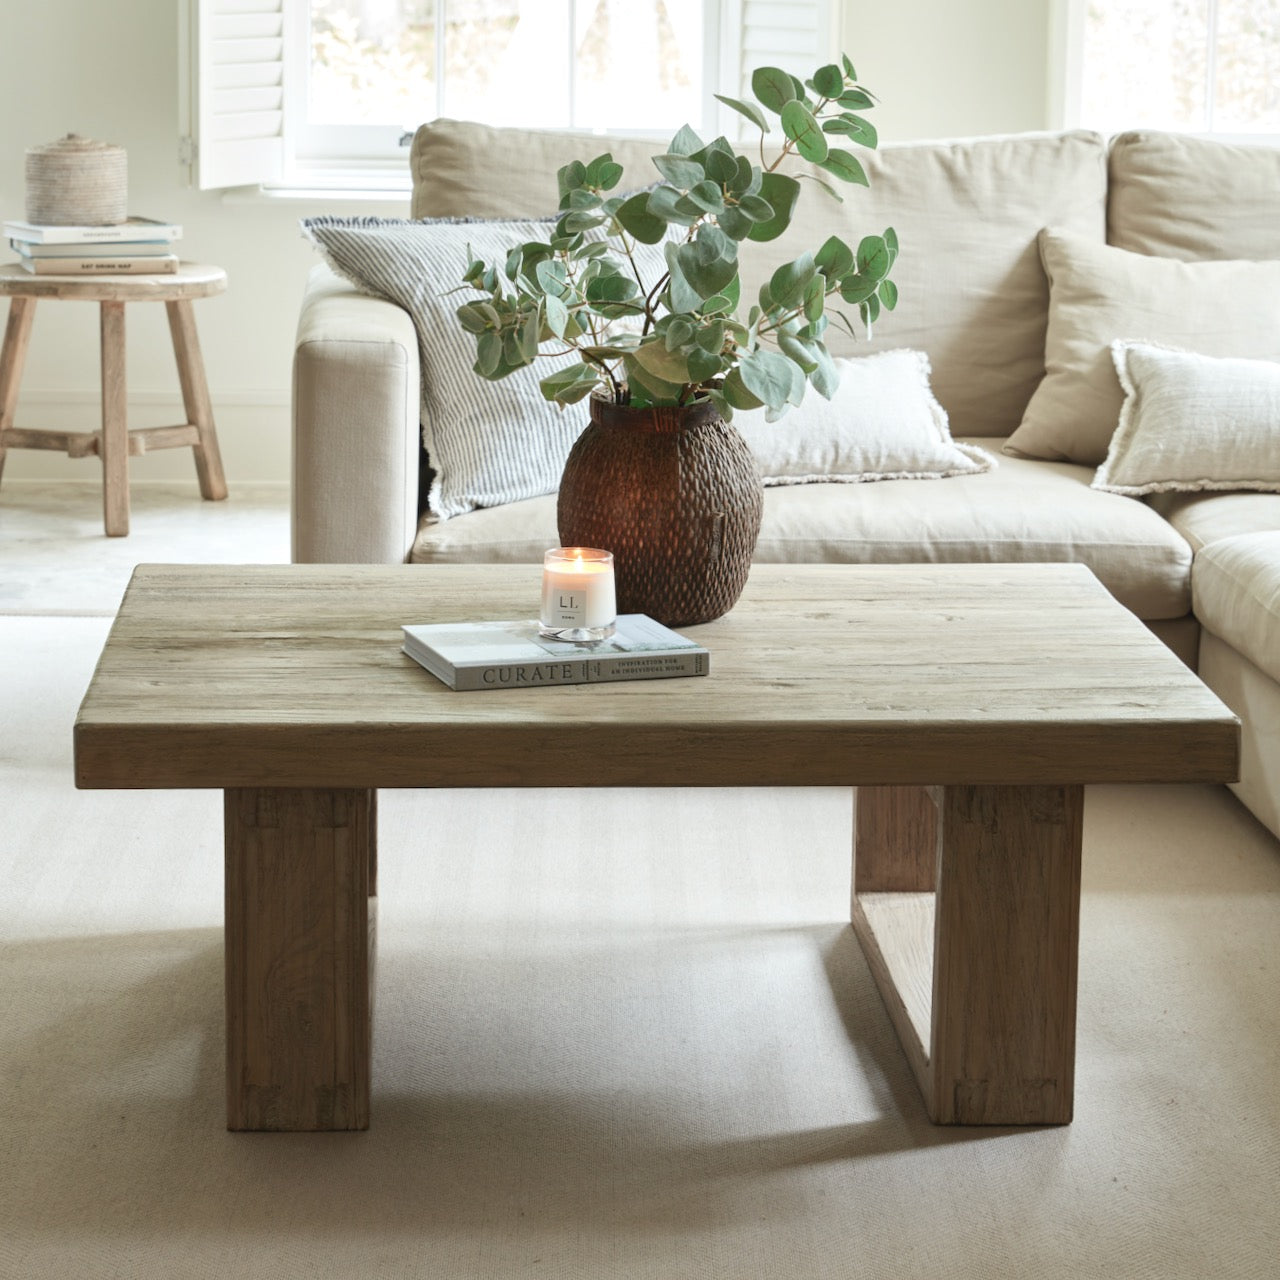 Marlow Reclaimed Wooden Coffee Table